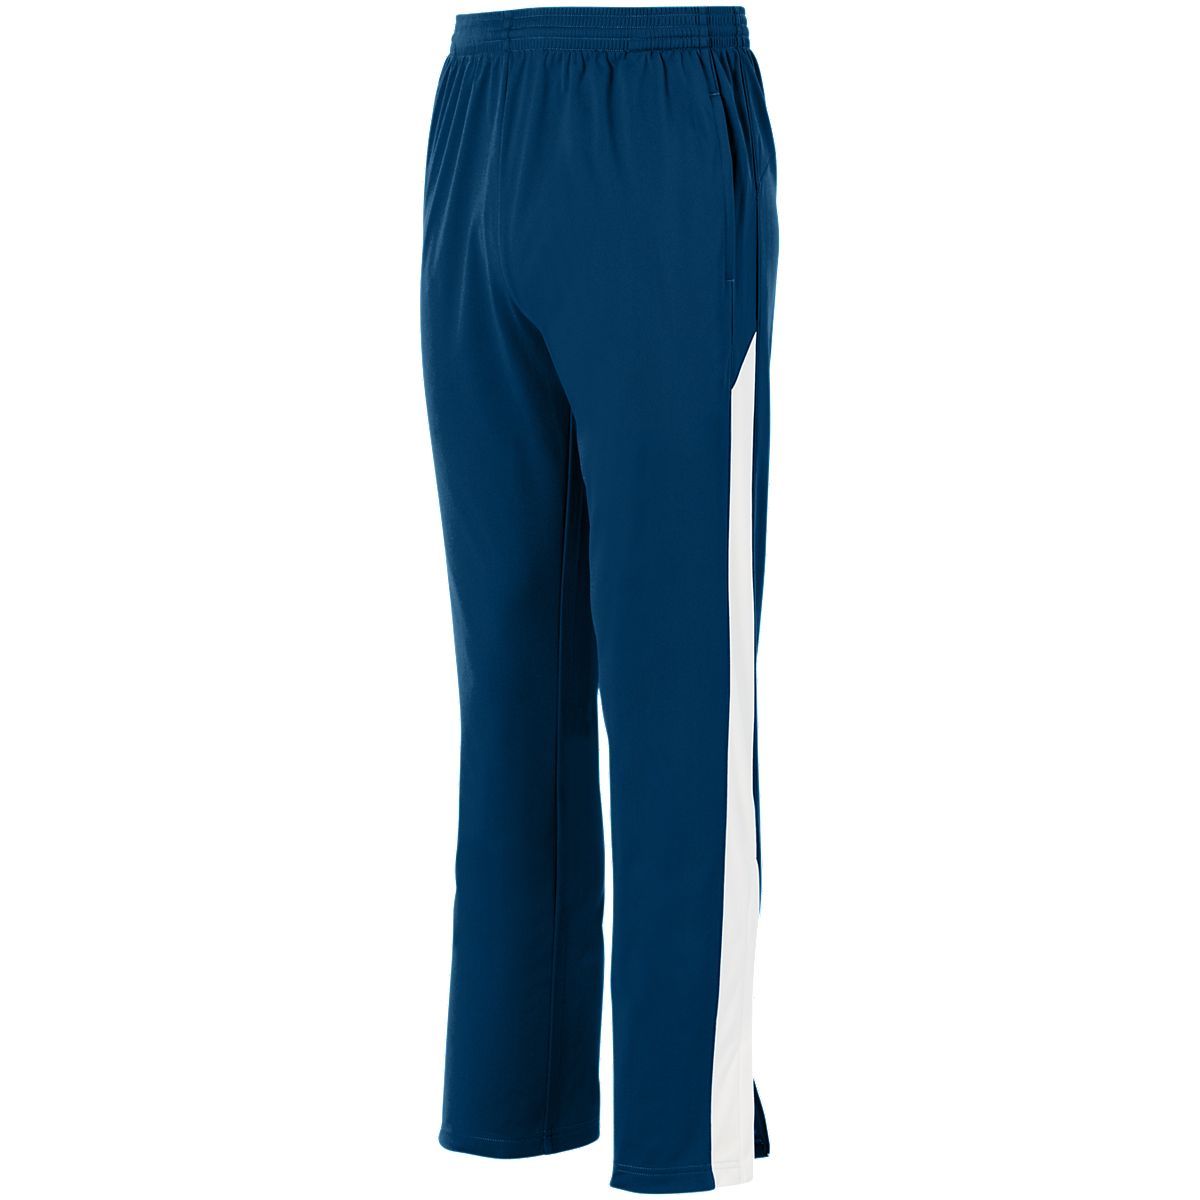 Augusta Sportswear Medalist Pant 2.0 in Navy/White  -Part of the Adult, Adult-Pants, Pants, Augusta-Products product lines at KanaleyCreations.com